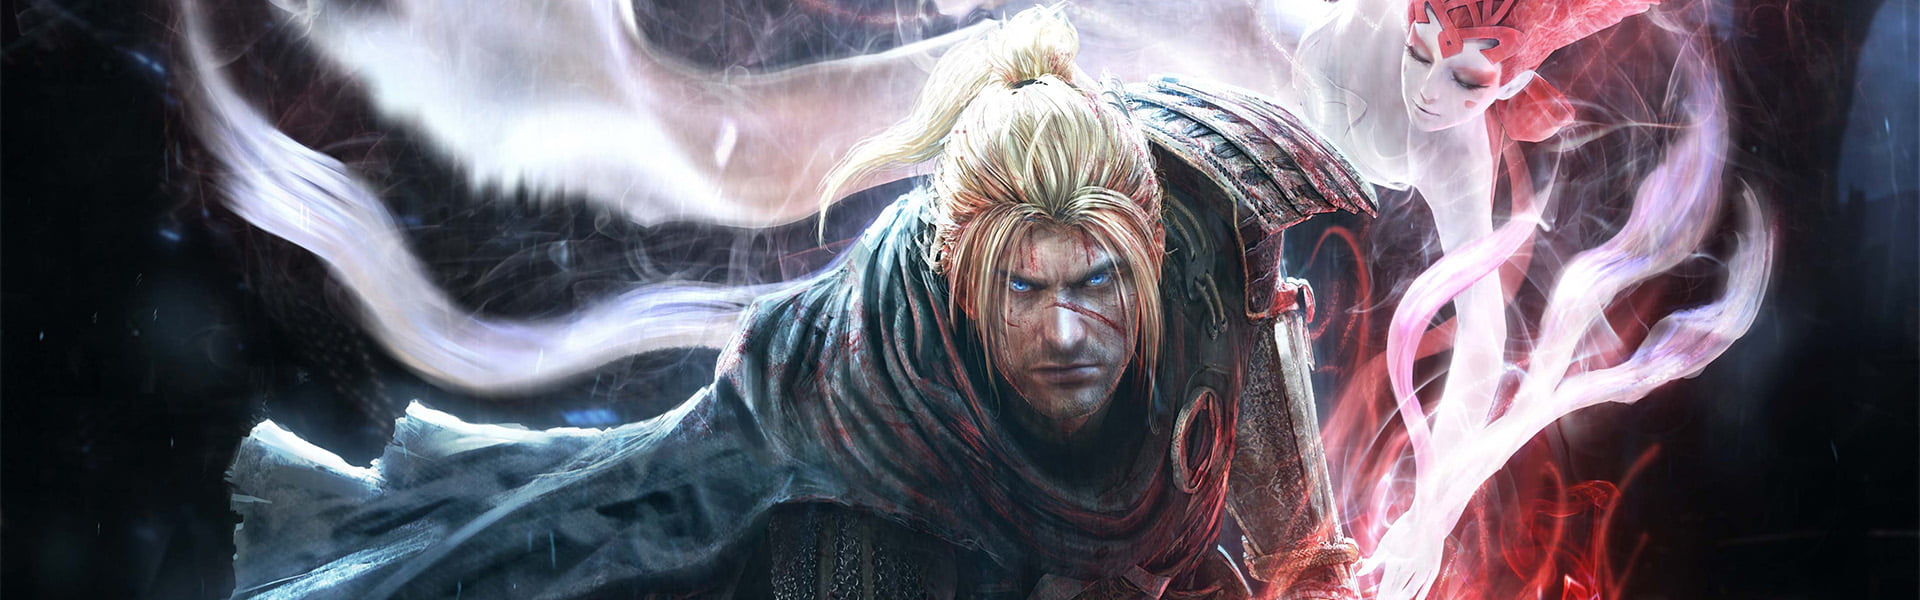 Nioh Review 13